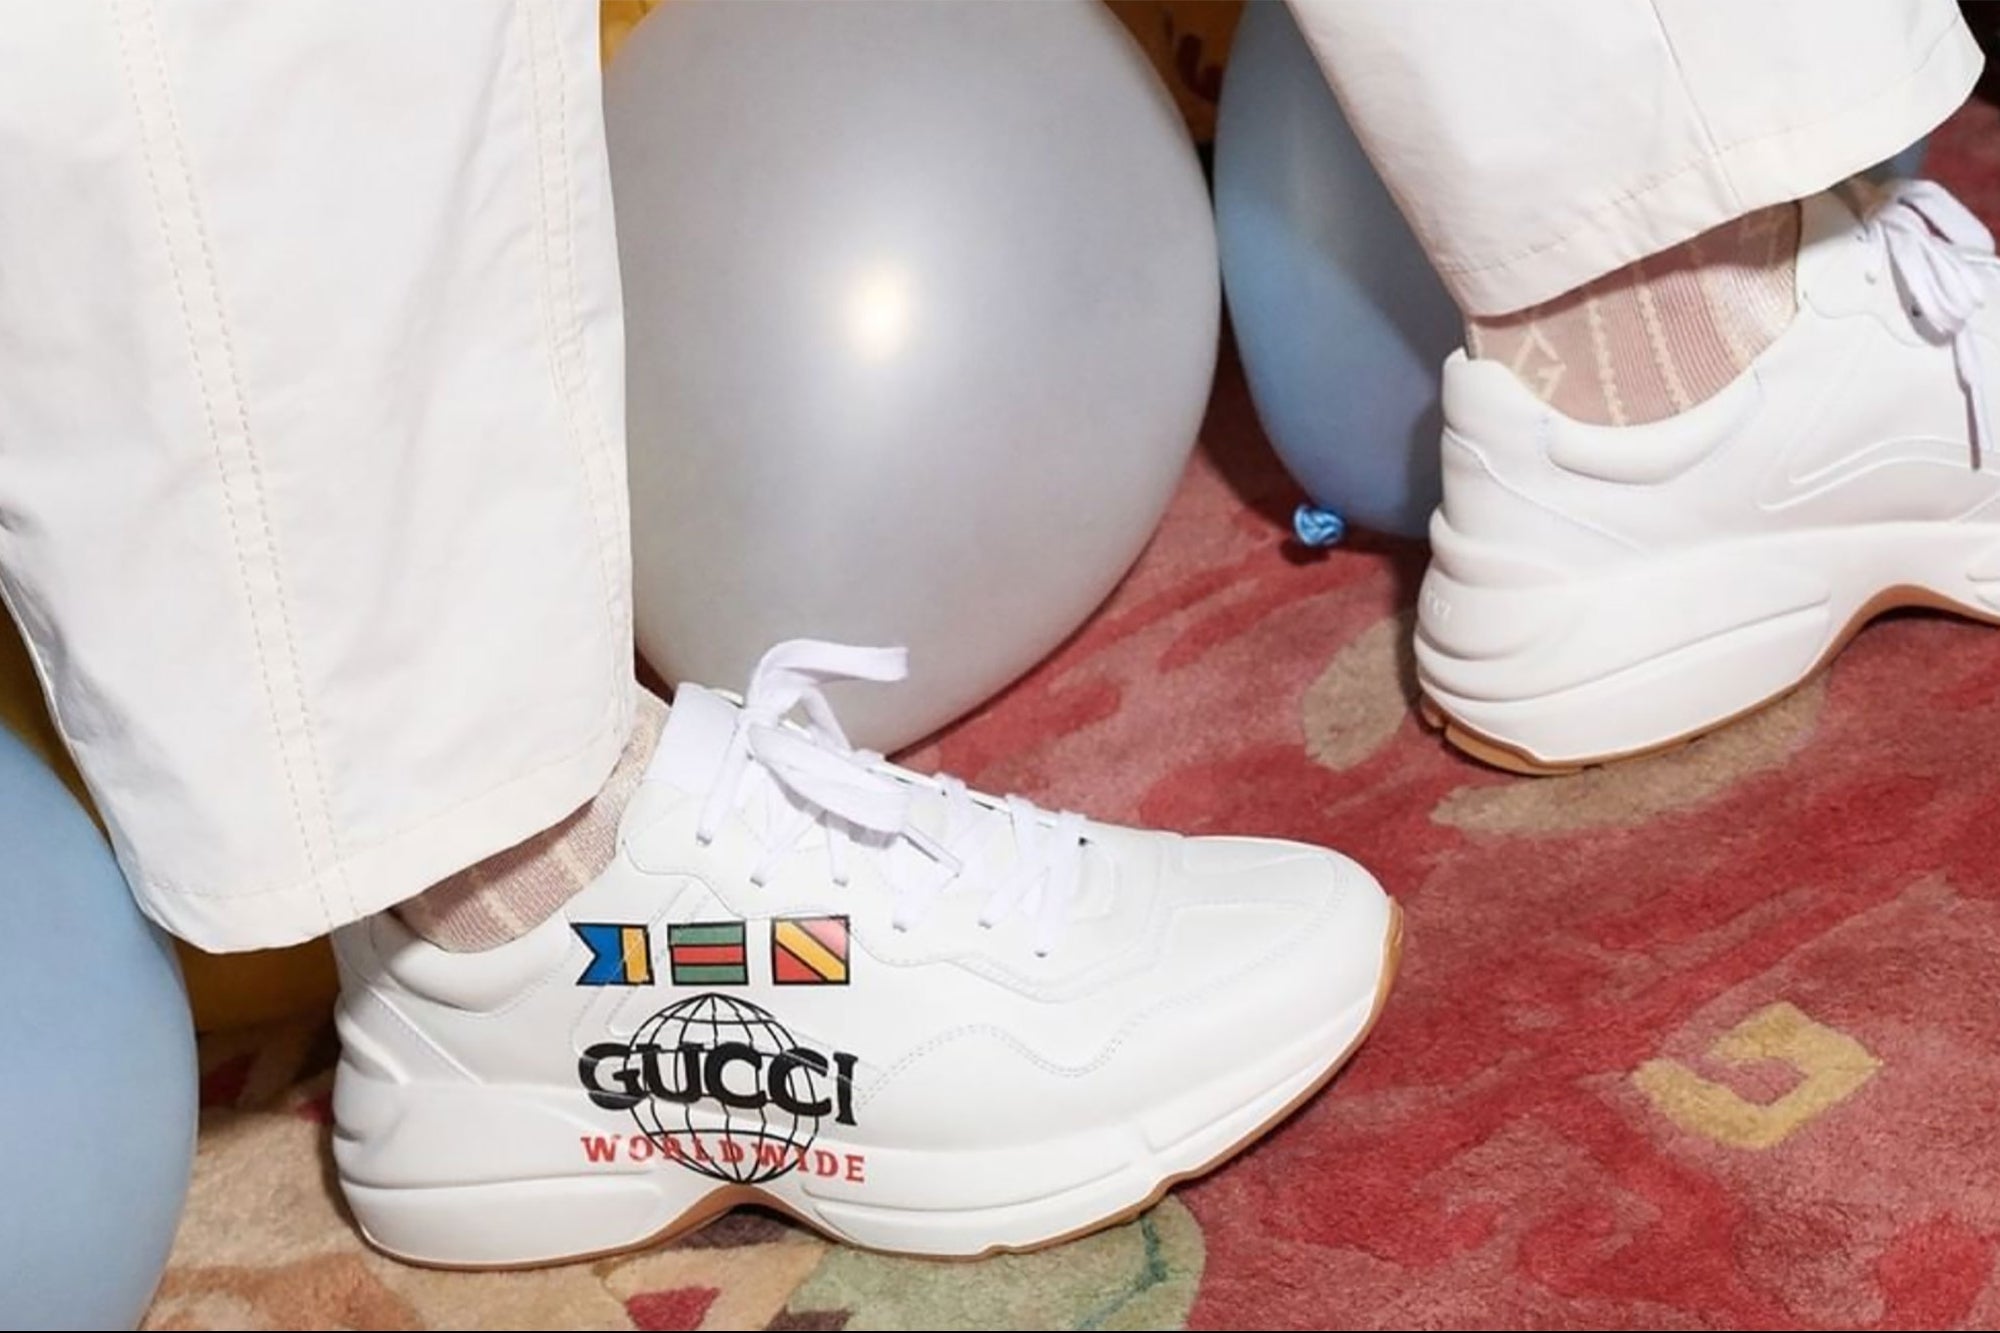 The Week In Web3: Gucci x Vans, ALTS By adidas, AMI Paris x ZEPETO, LVMH's  Patou